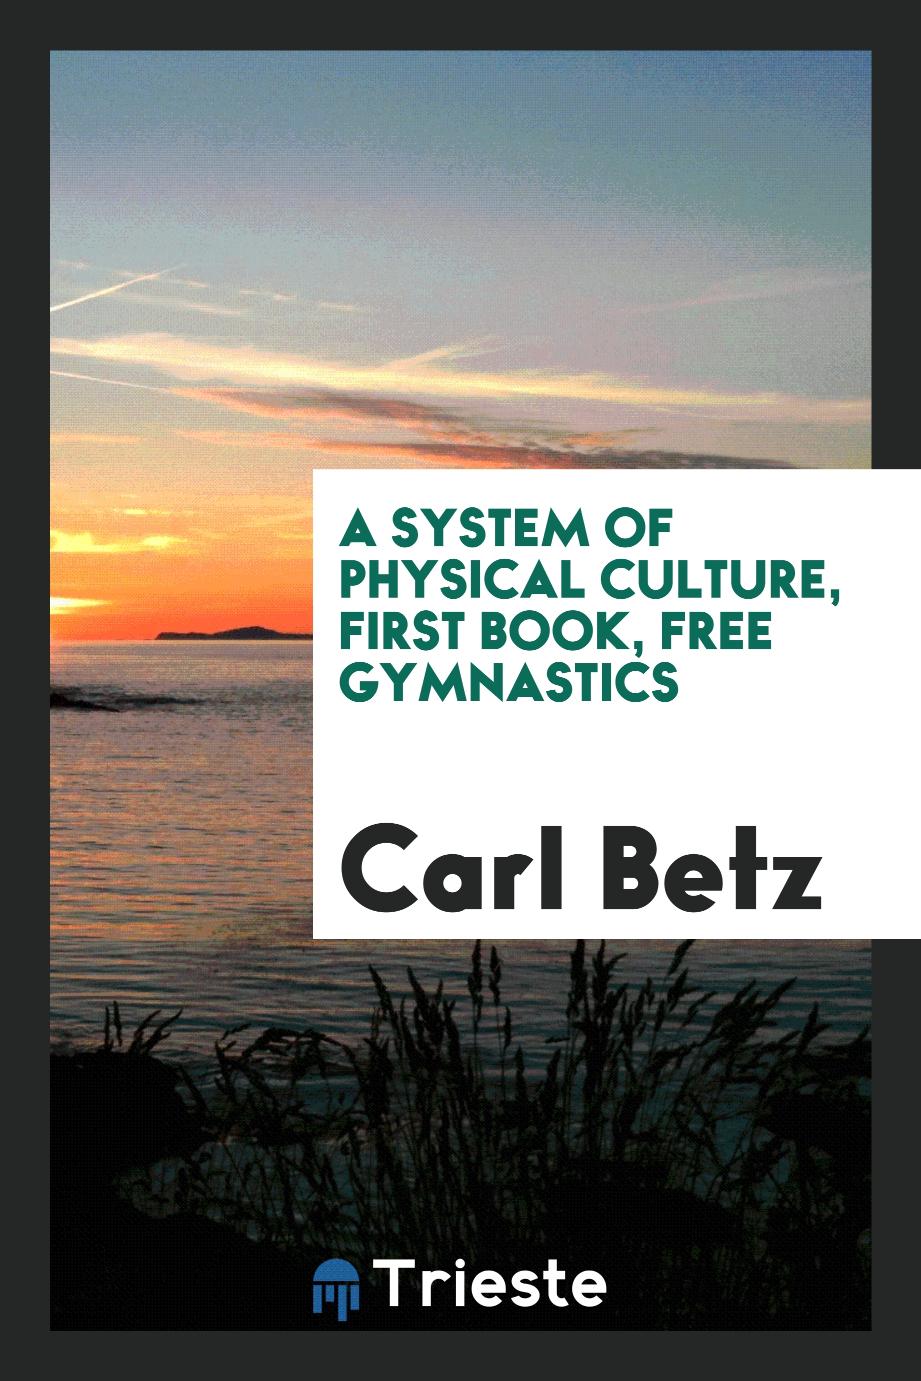 A System of Physical Culture, First Book, Free Gymnastics